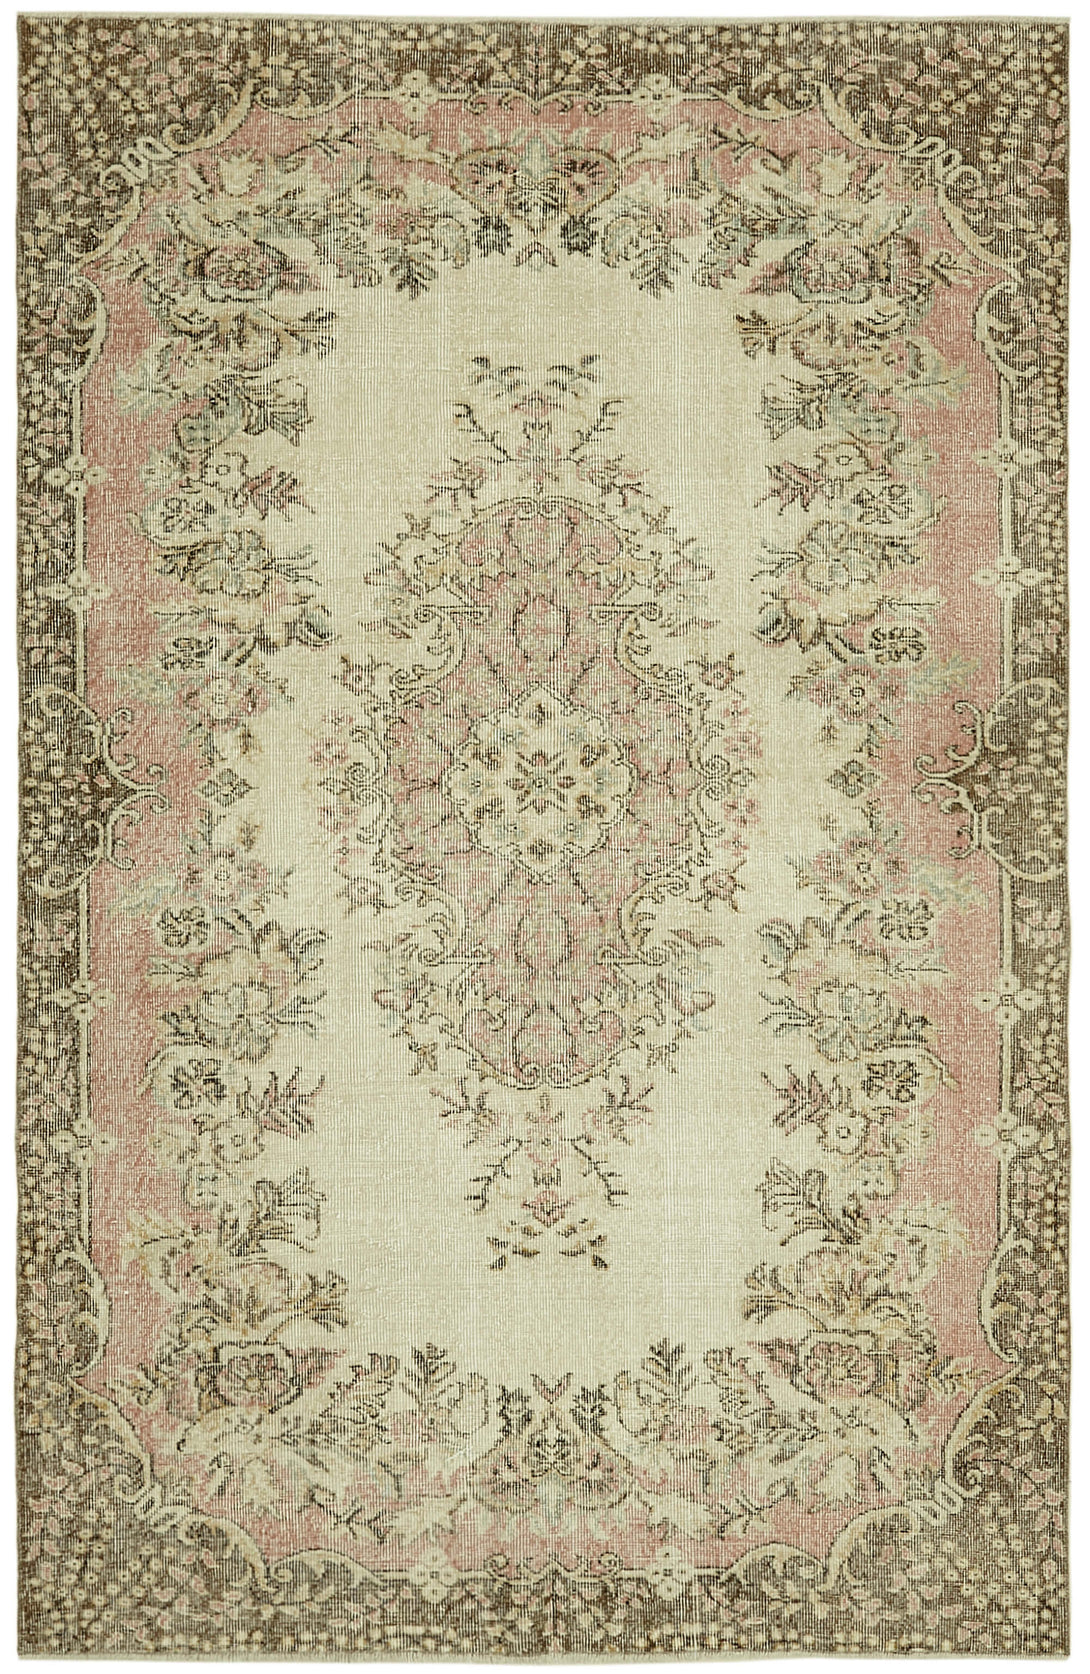 Handmade White Wash Area Rug > Design# OL-AC-41593 > Size: 5'-6" x 8'-6", Carpet Culture Rugs, Handmade Rugs, NYC Rugs, New Rugs, Shop Rugs, Rug Store, Outlet Rugs, SoHo Rugs, Rugs in USA